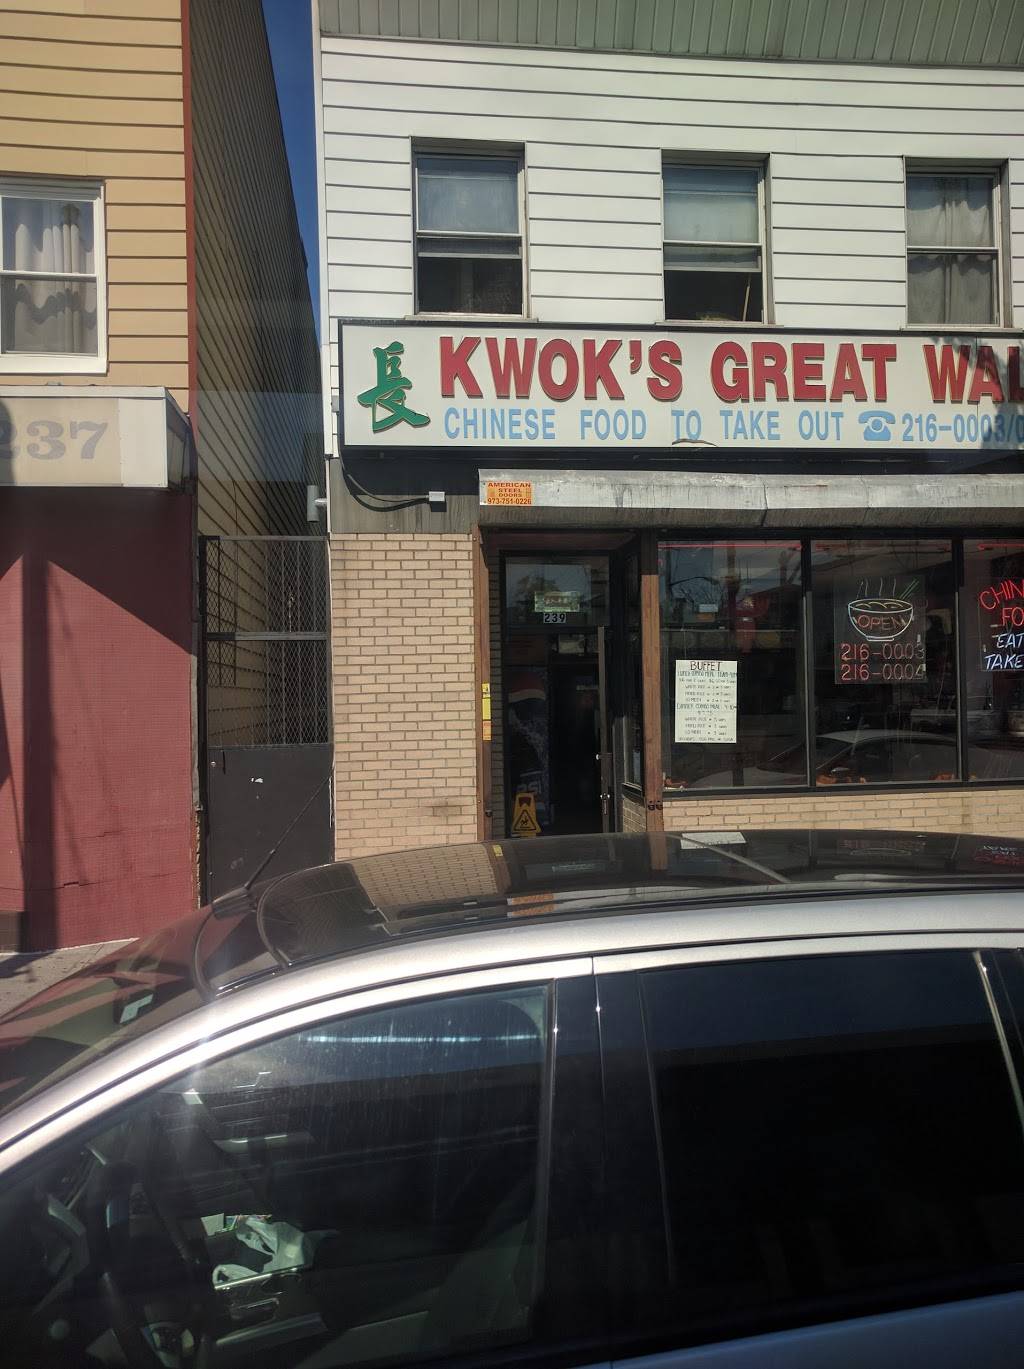 Kwoks Great Wall | restaurant | 239 Central Ave, Jersey City, NJ 07307, USA | 2012160003 OR +1 201-216-0003